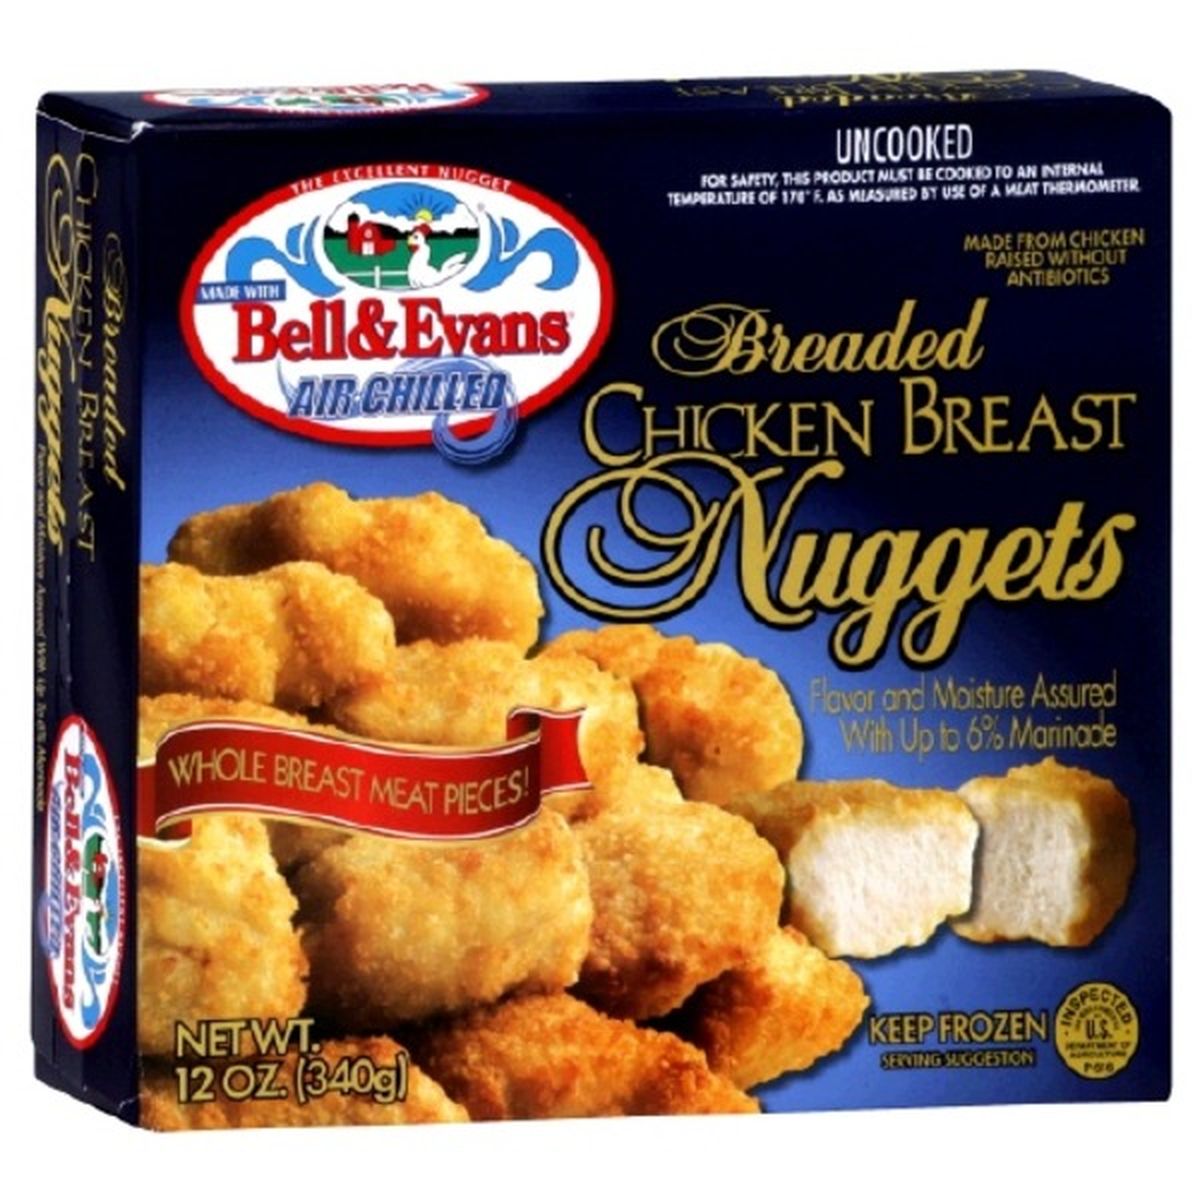 Calories in Bell & Evans Chicken Breast Nuggets, Breaded